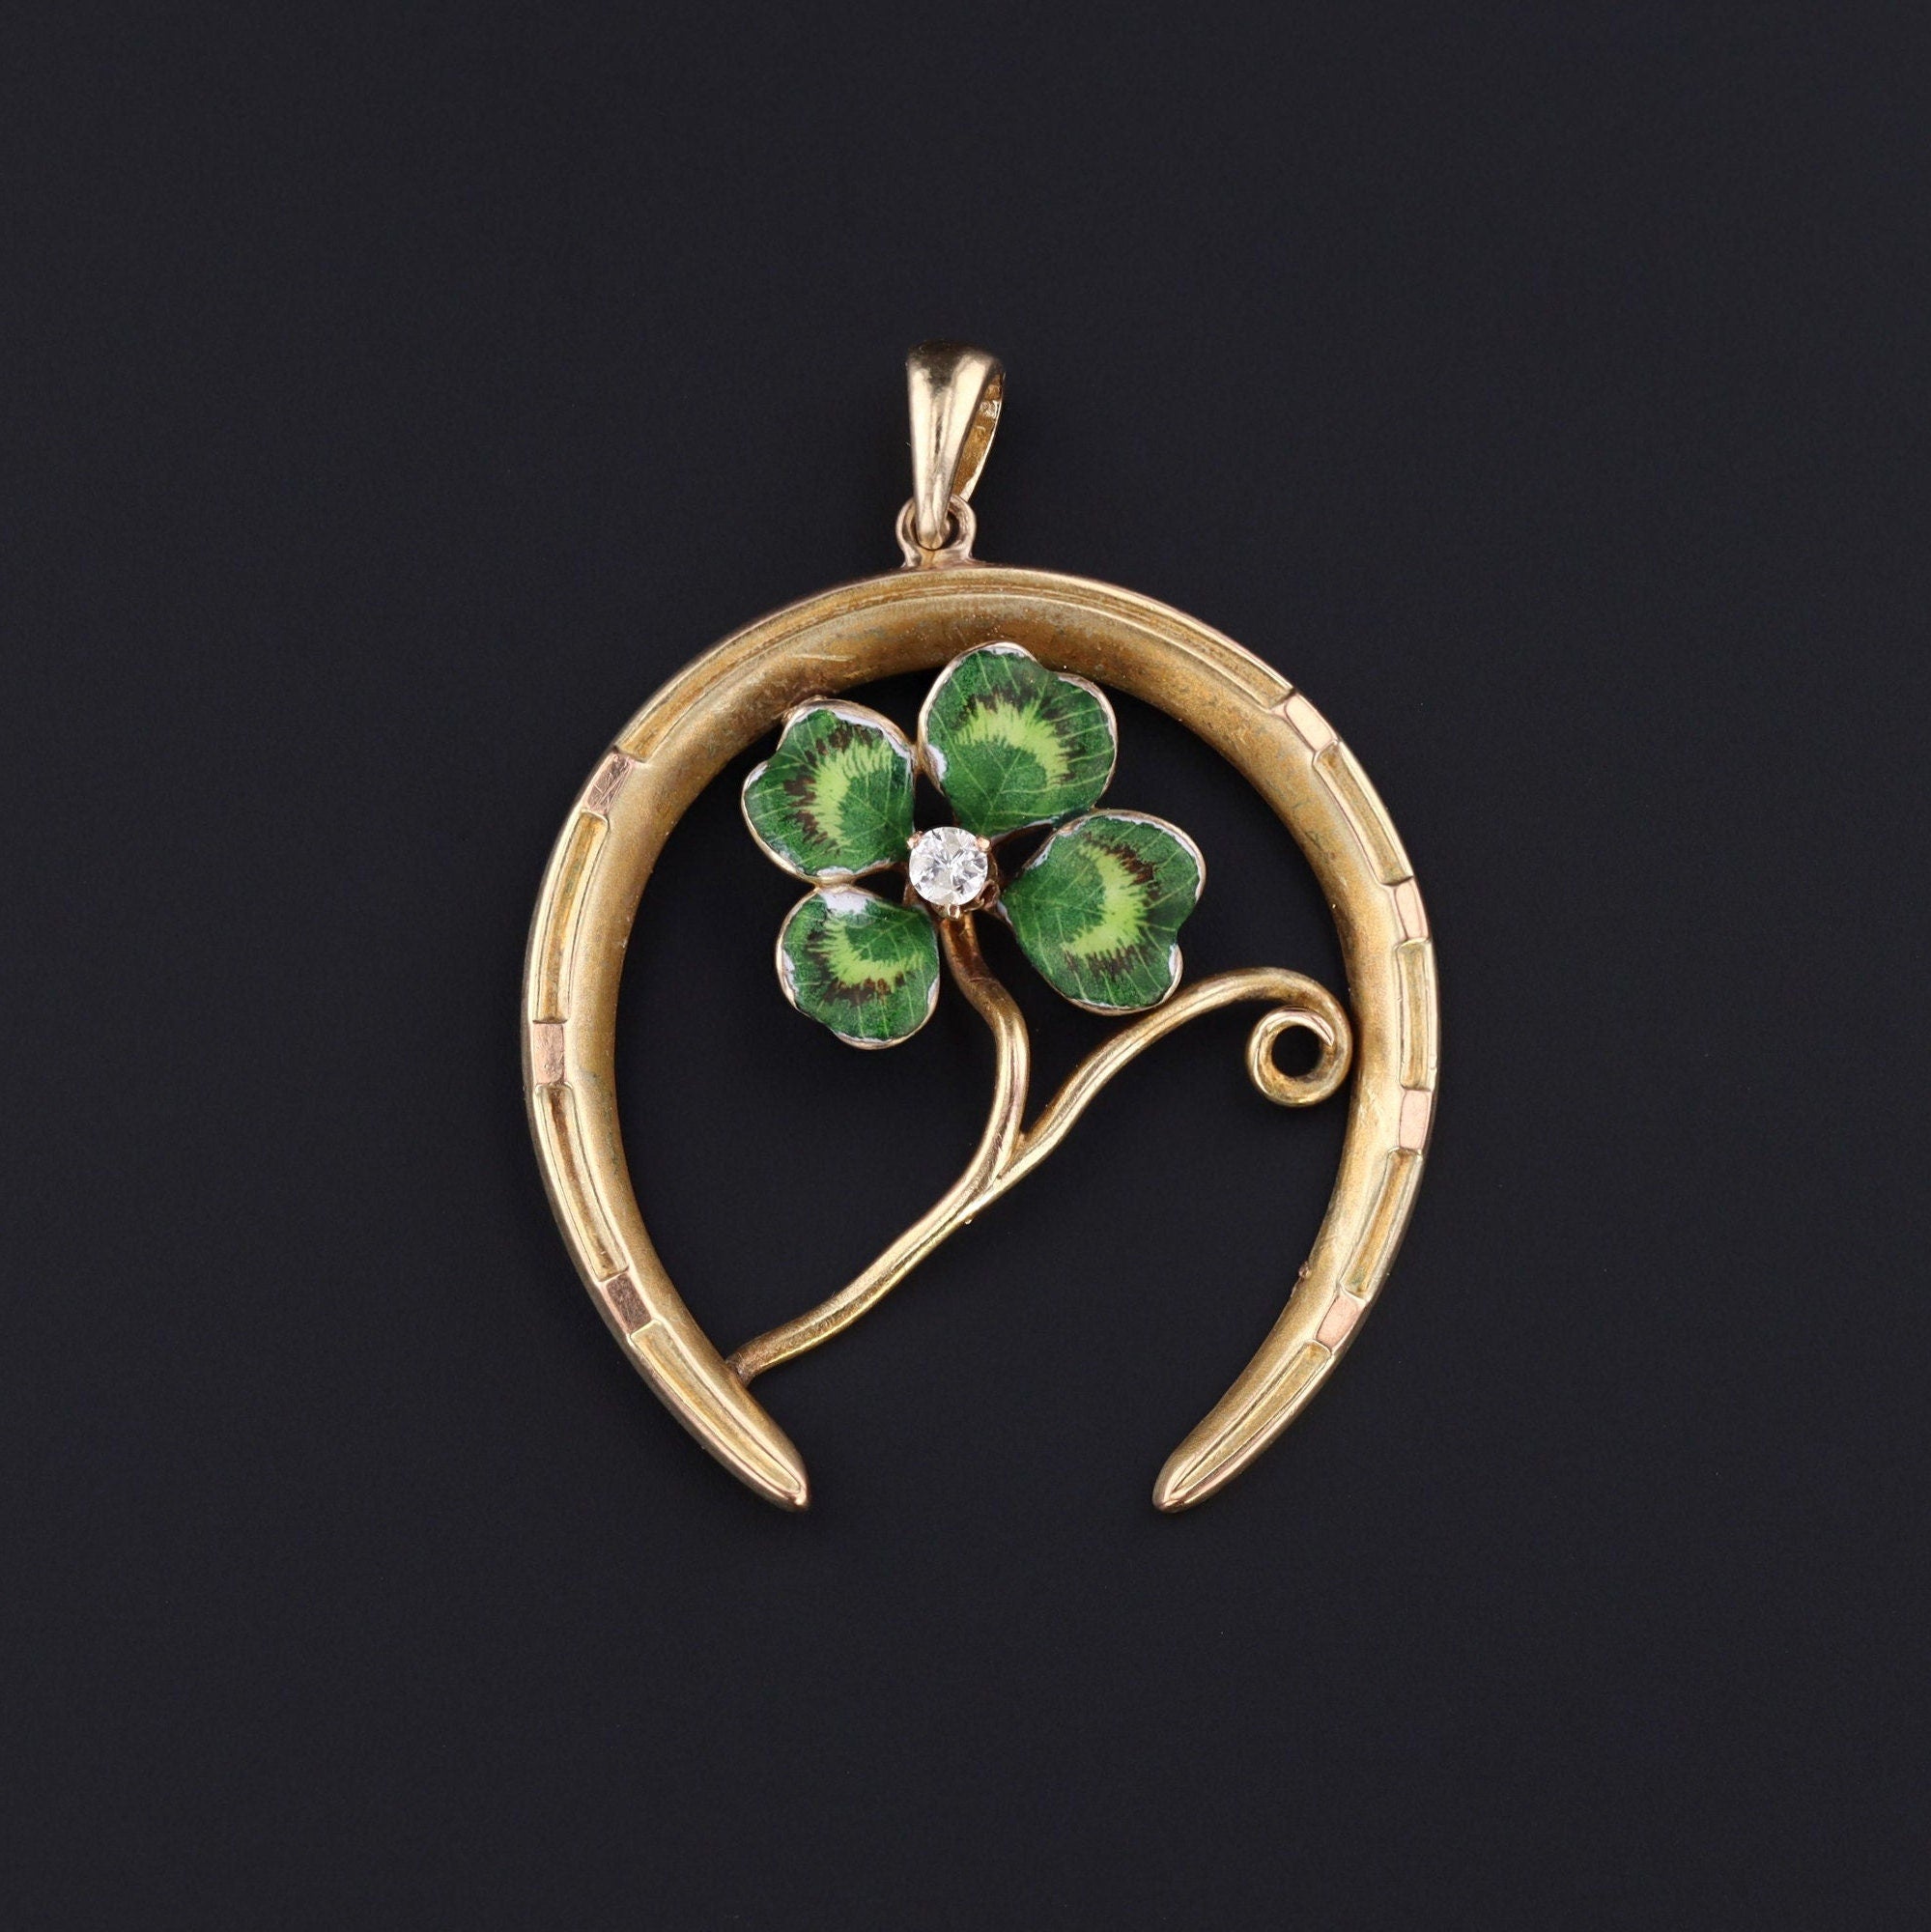 Antique Clover and Horseshoe Conversion Pendant of 10k Gold